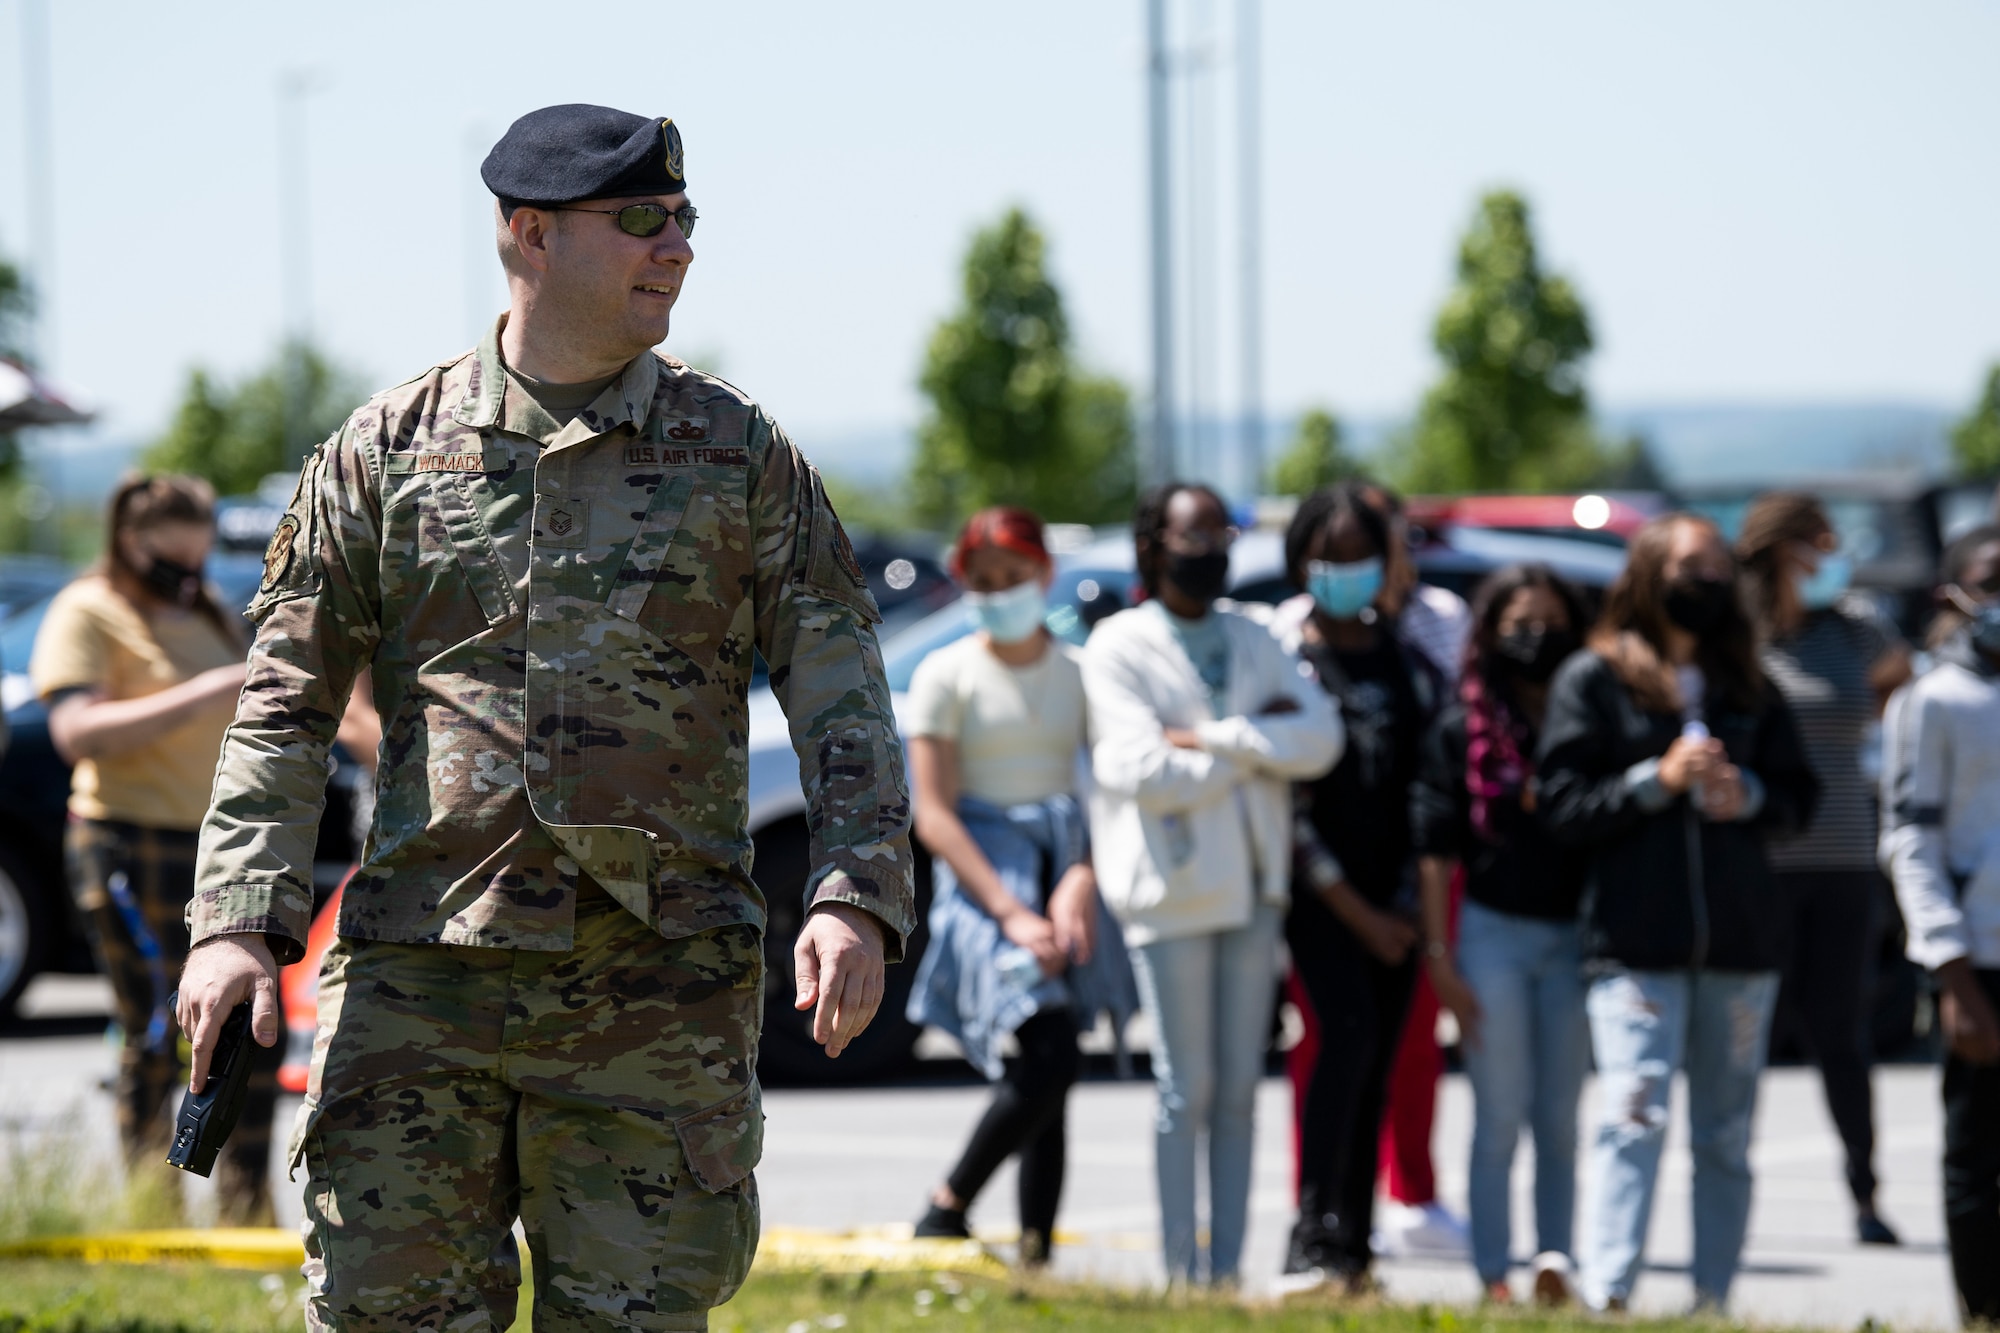 U.S. Air Force Security Forces Airman demonstrates taser techniques to onlookers.